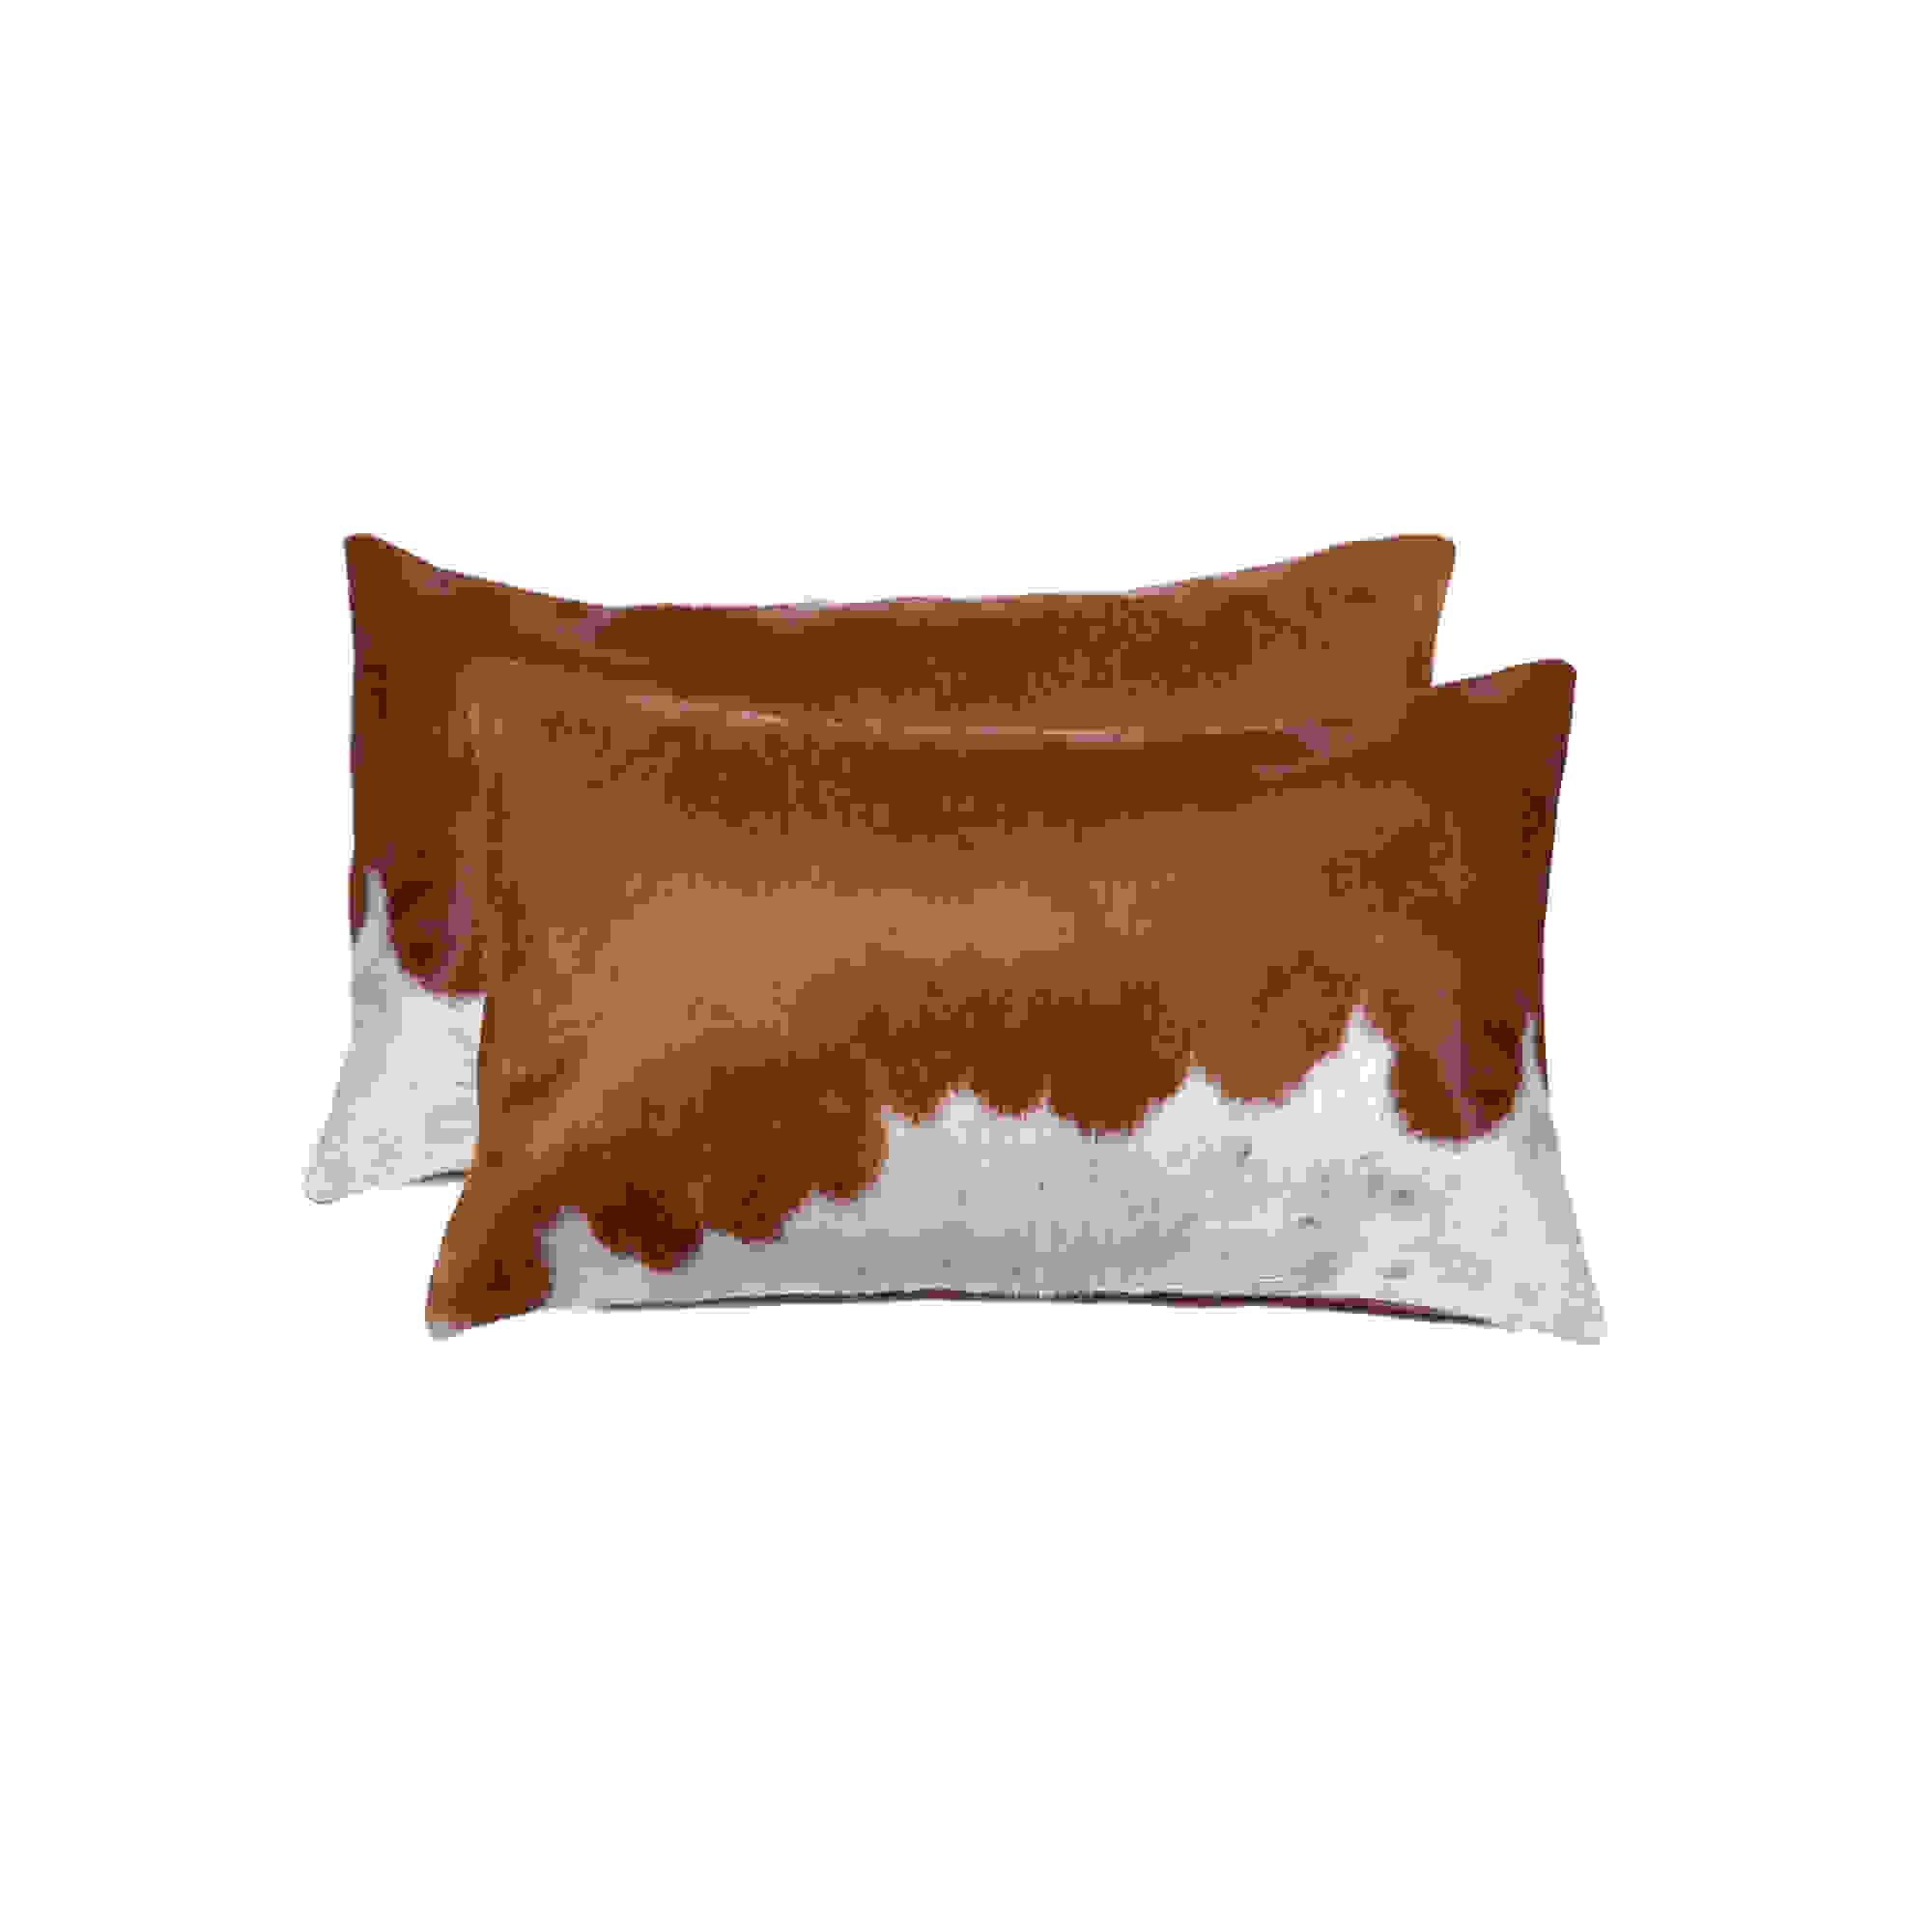 12" x 20" x 5" Brown And White, Cowhide - Pillow 2-Pack